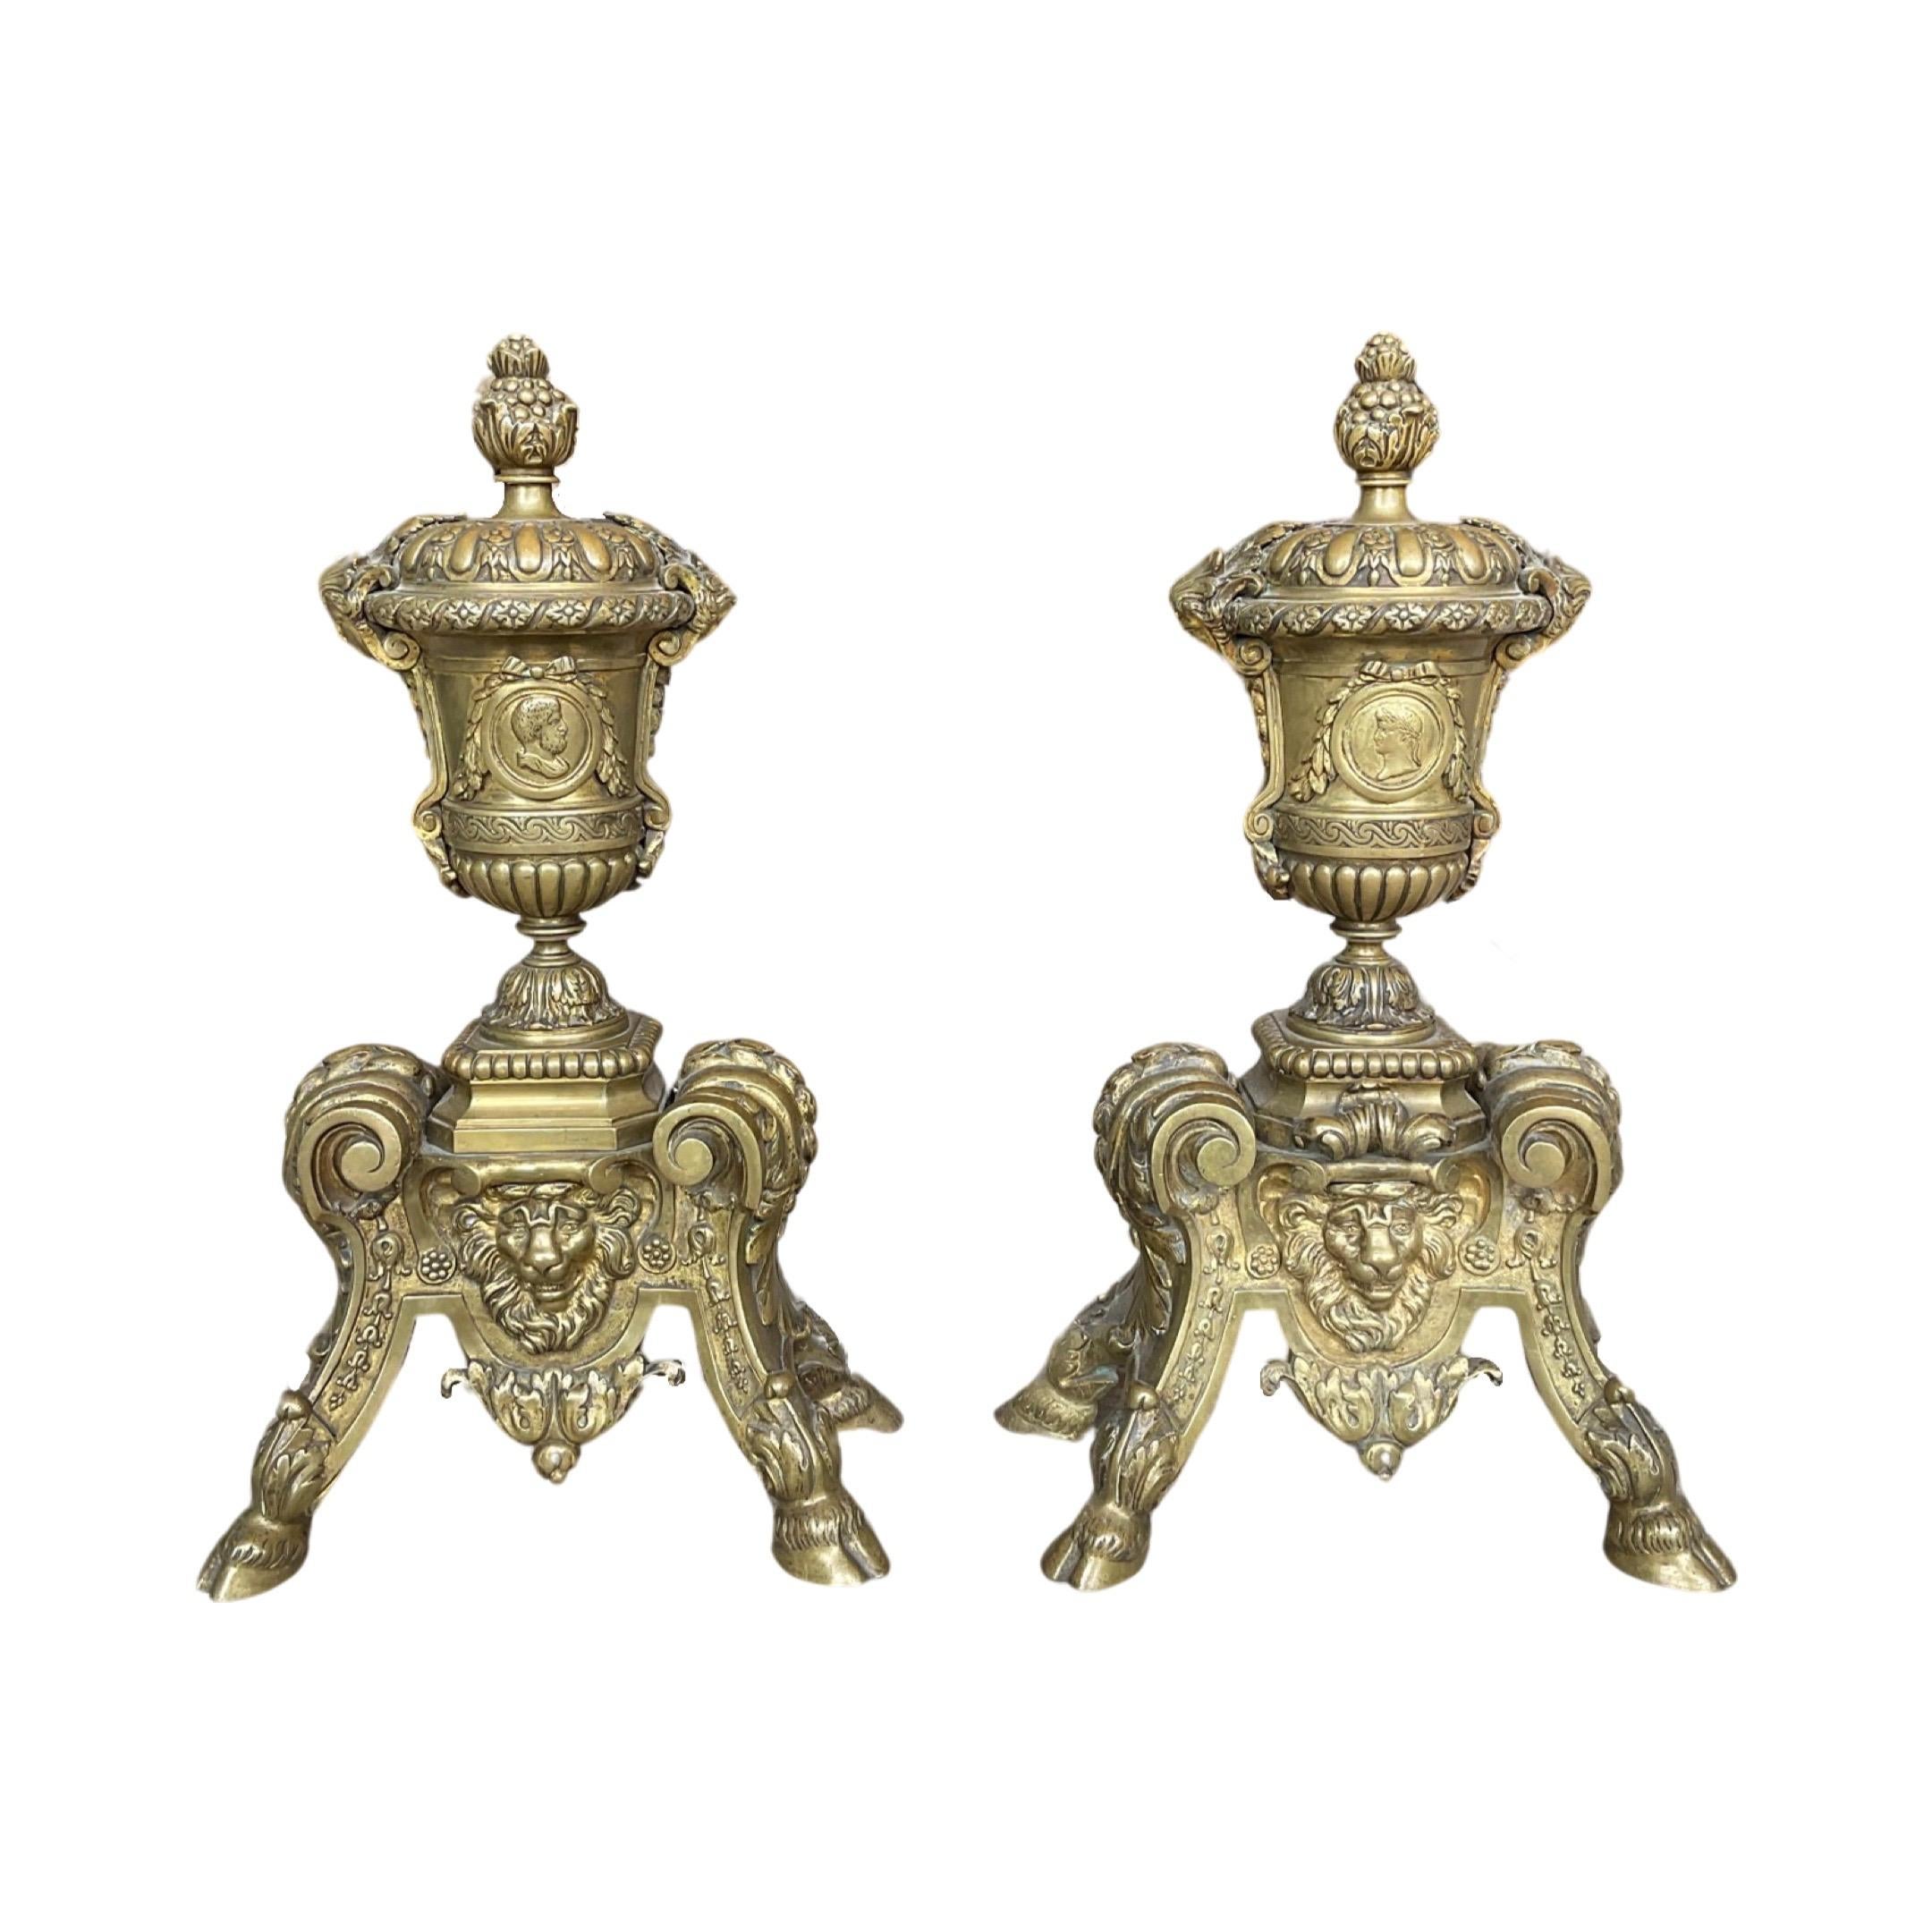 These French bronze andirons are perfect for bringing a historic vibe to any fireplace. Crafted from iron with a beautiful bronze finish, they are estimated to date to the late 18th century. A perfect piece to add to any room.